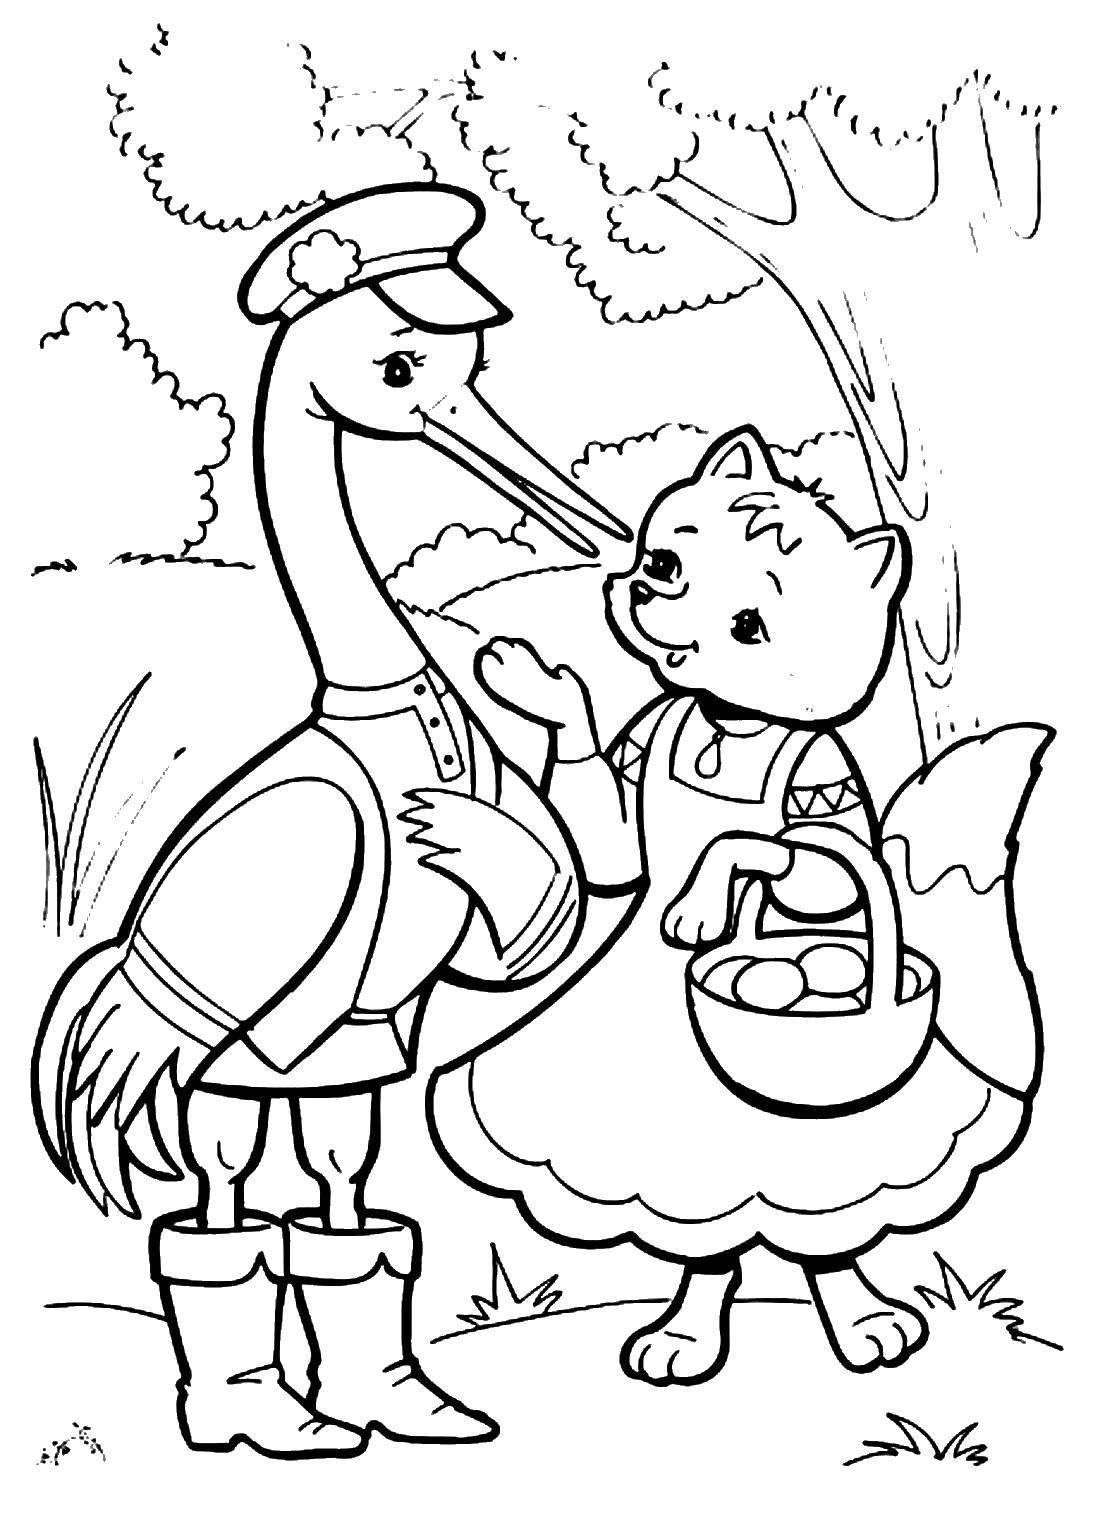 Coloring The Fox and the crane. Category friendship. Tags:  Fairy tales.